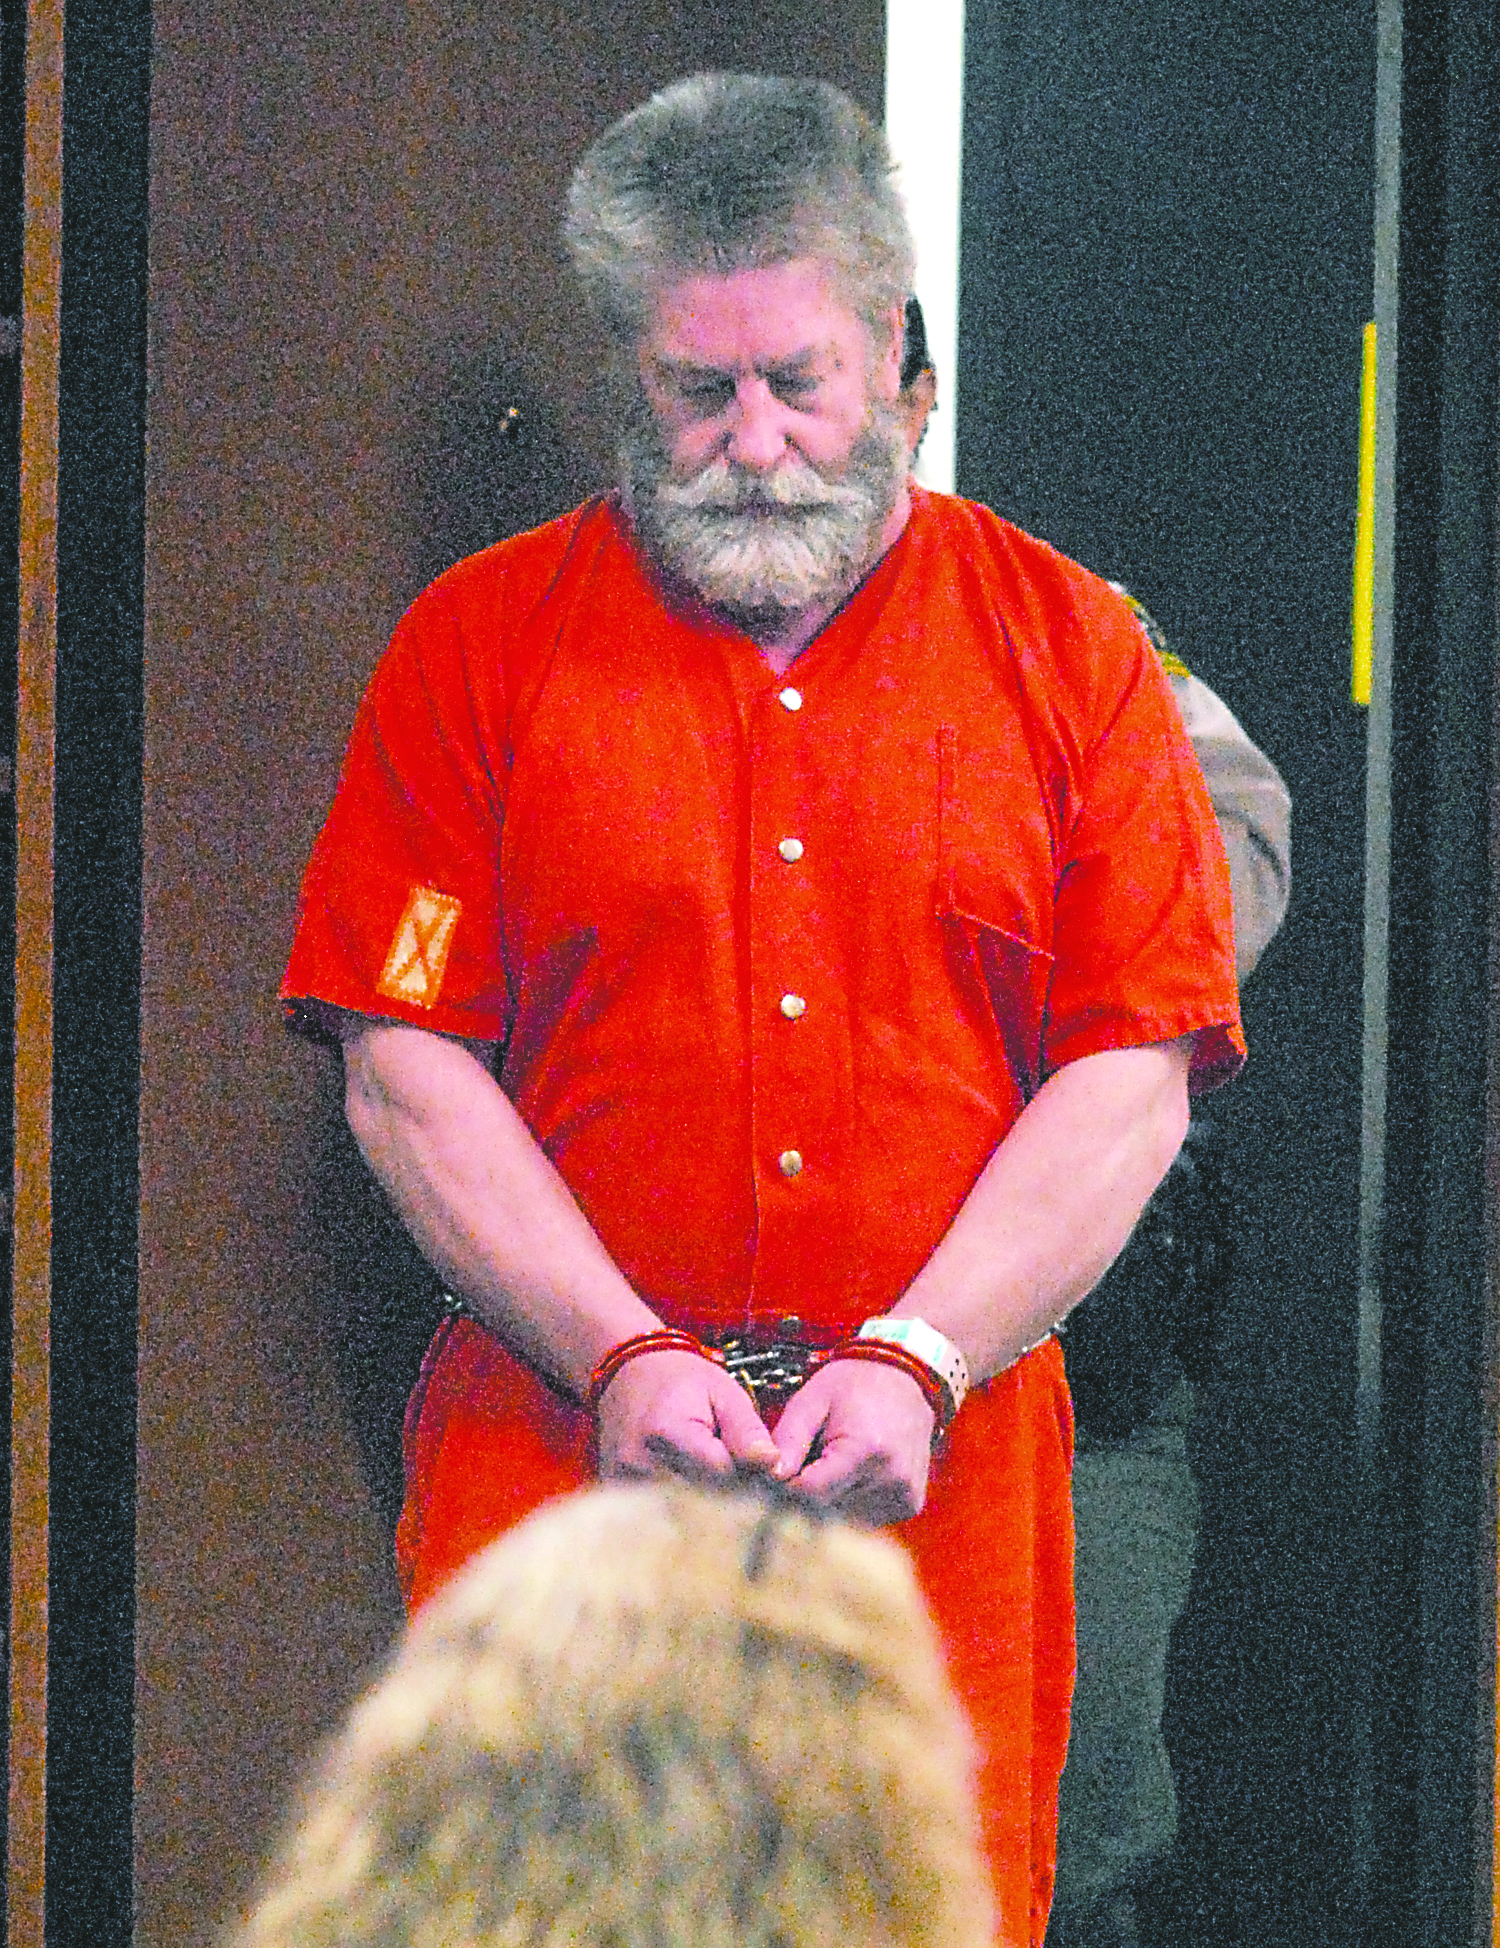 Barry Swegle enters Clallam County Superior Court in Port Angeles for a status hearing Friday (July 19).  --Photo by Keith Thorpe/Peninsula Daily News